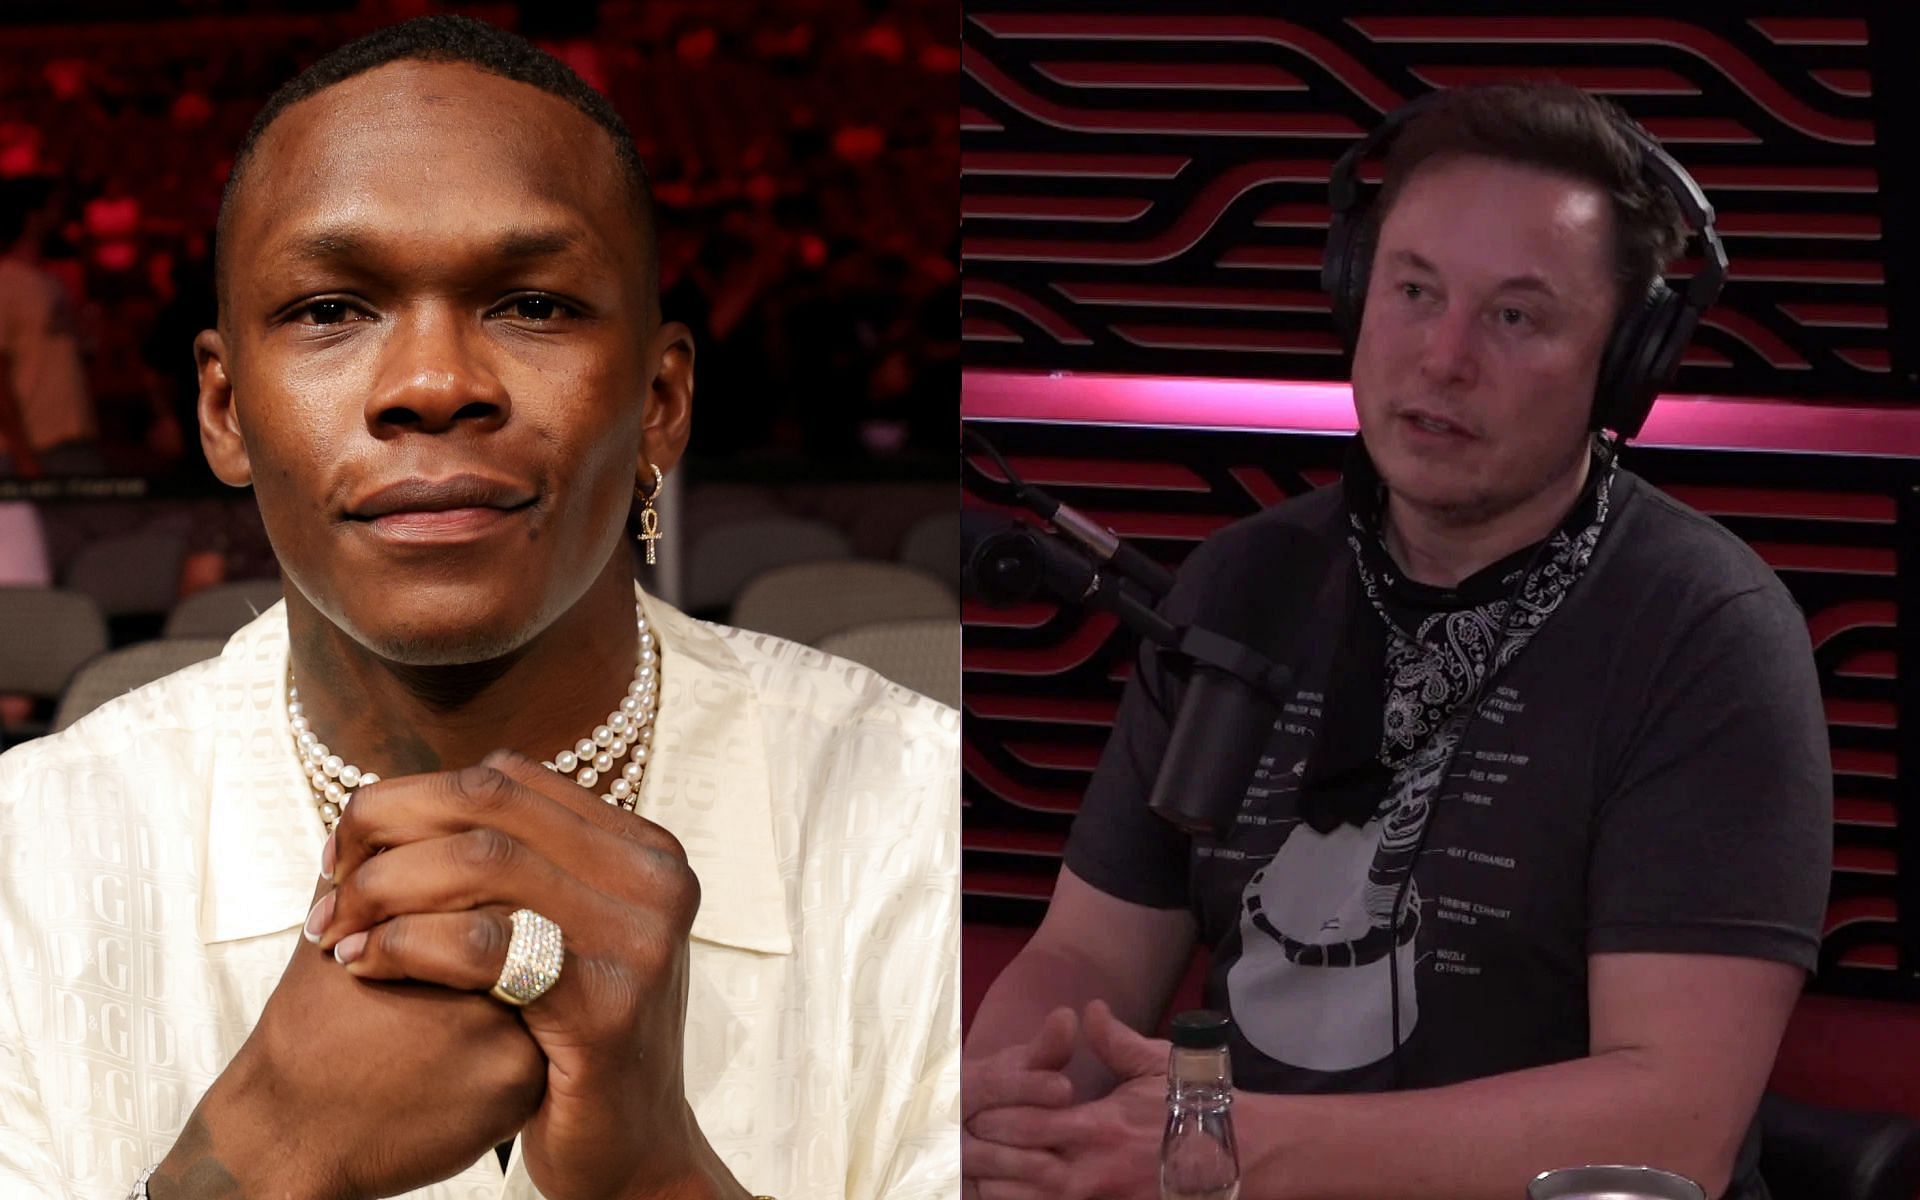 Israel Adesanya (left) and Elon Musk (right) [Image credits: Getty Images and @chicago_glenn on Twitter]